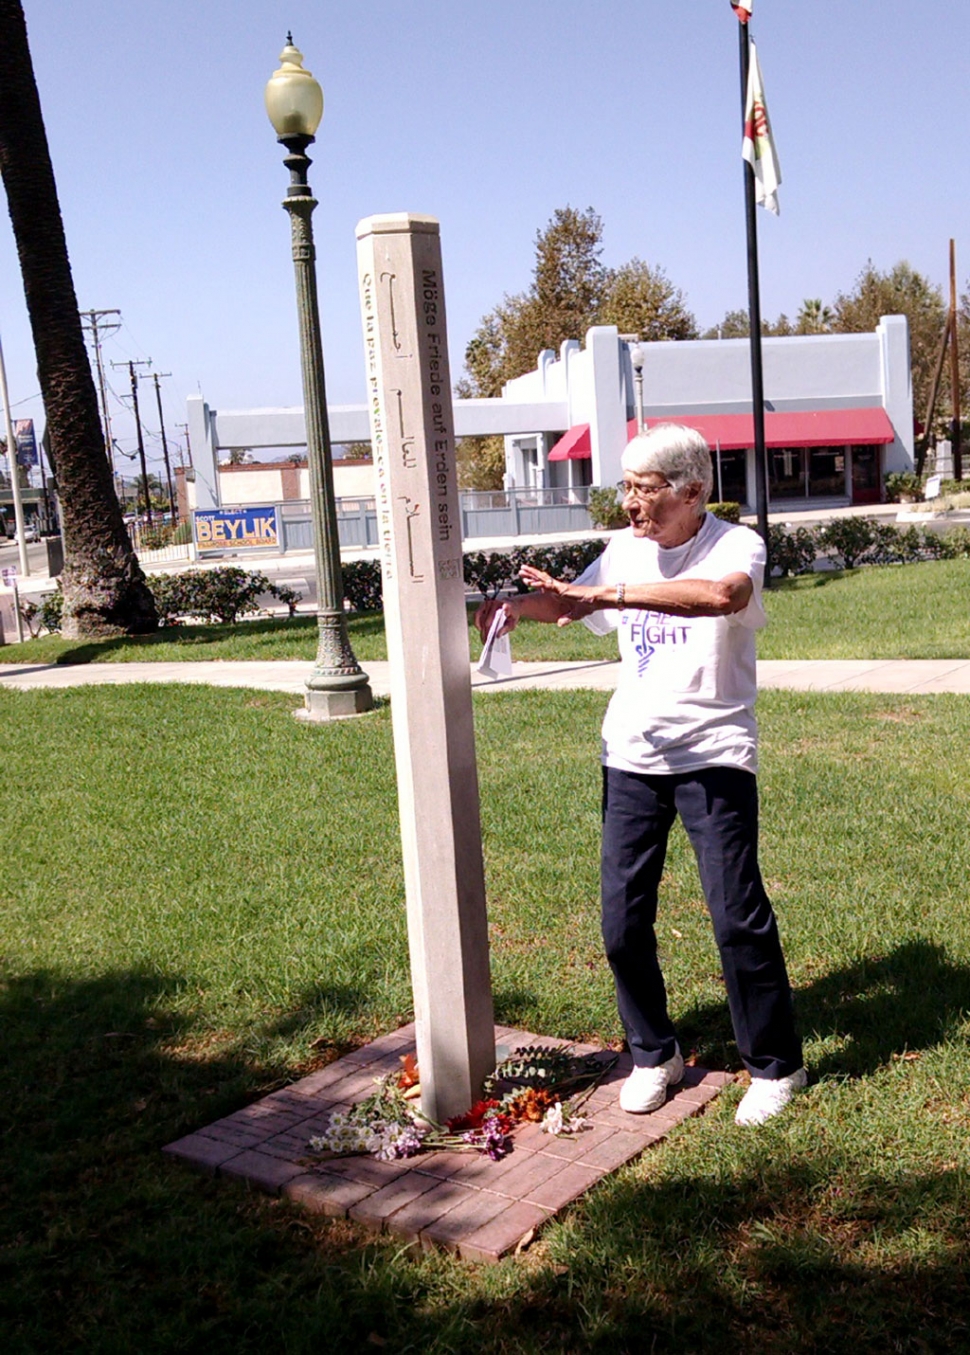 A group gathered around the Fillmore Peace Pole in Fillmore City Park on September 21 to remind us all of the need for peace in our families, our community, our nation and the world.  The Peace Pole was installed in 2009 by the Fillmore Sorptimist Club under the leadership of Sarah Hansen.  It has engraved into the pole 